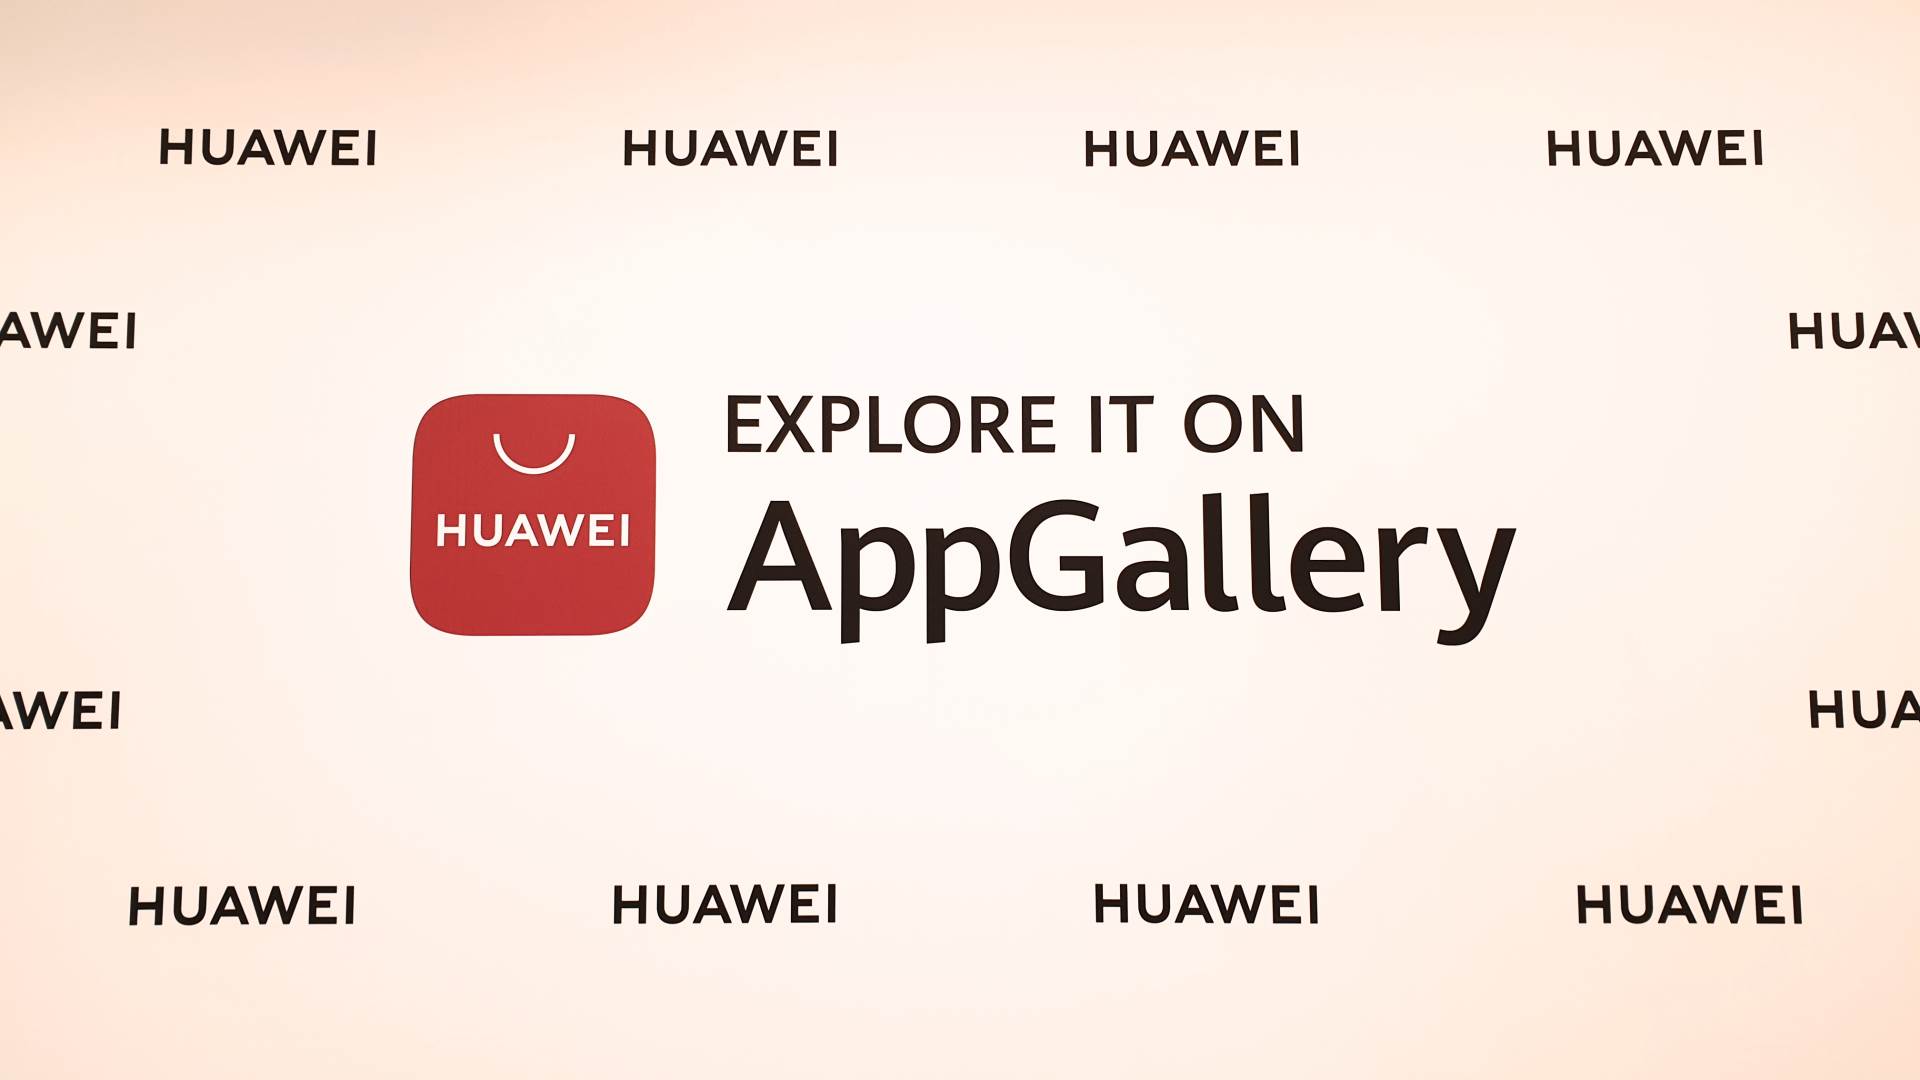  Huawei AppGallery, HMS, Huawei Mobile Services, AppGallery 